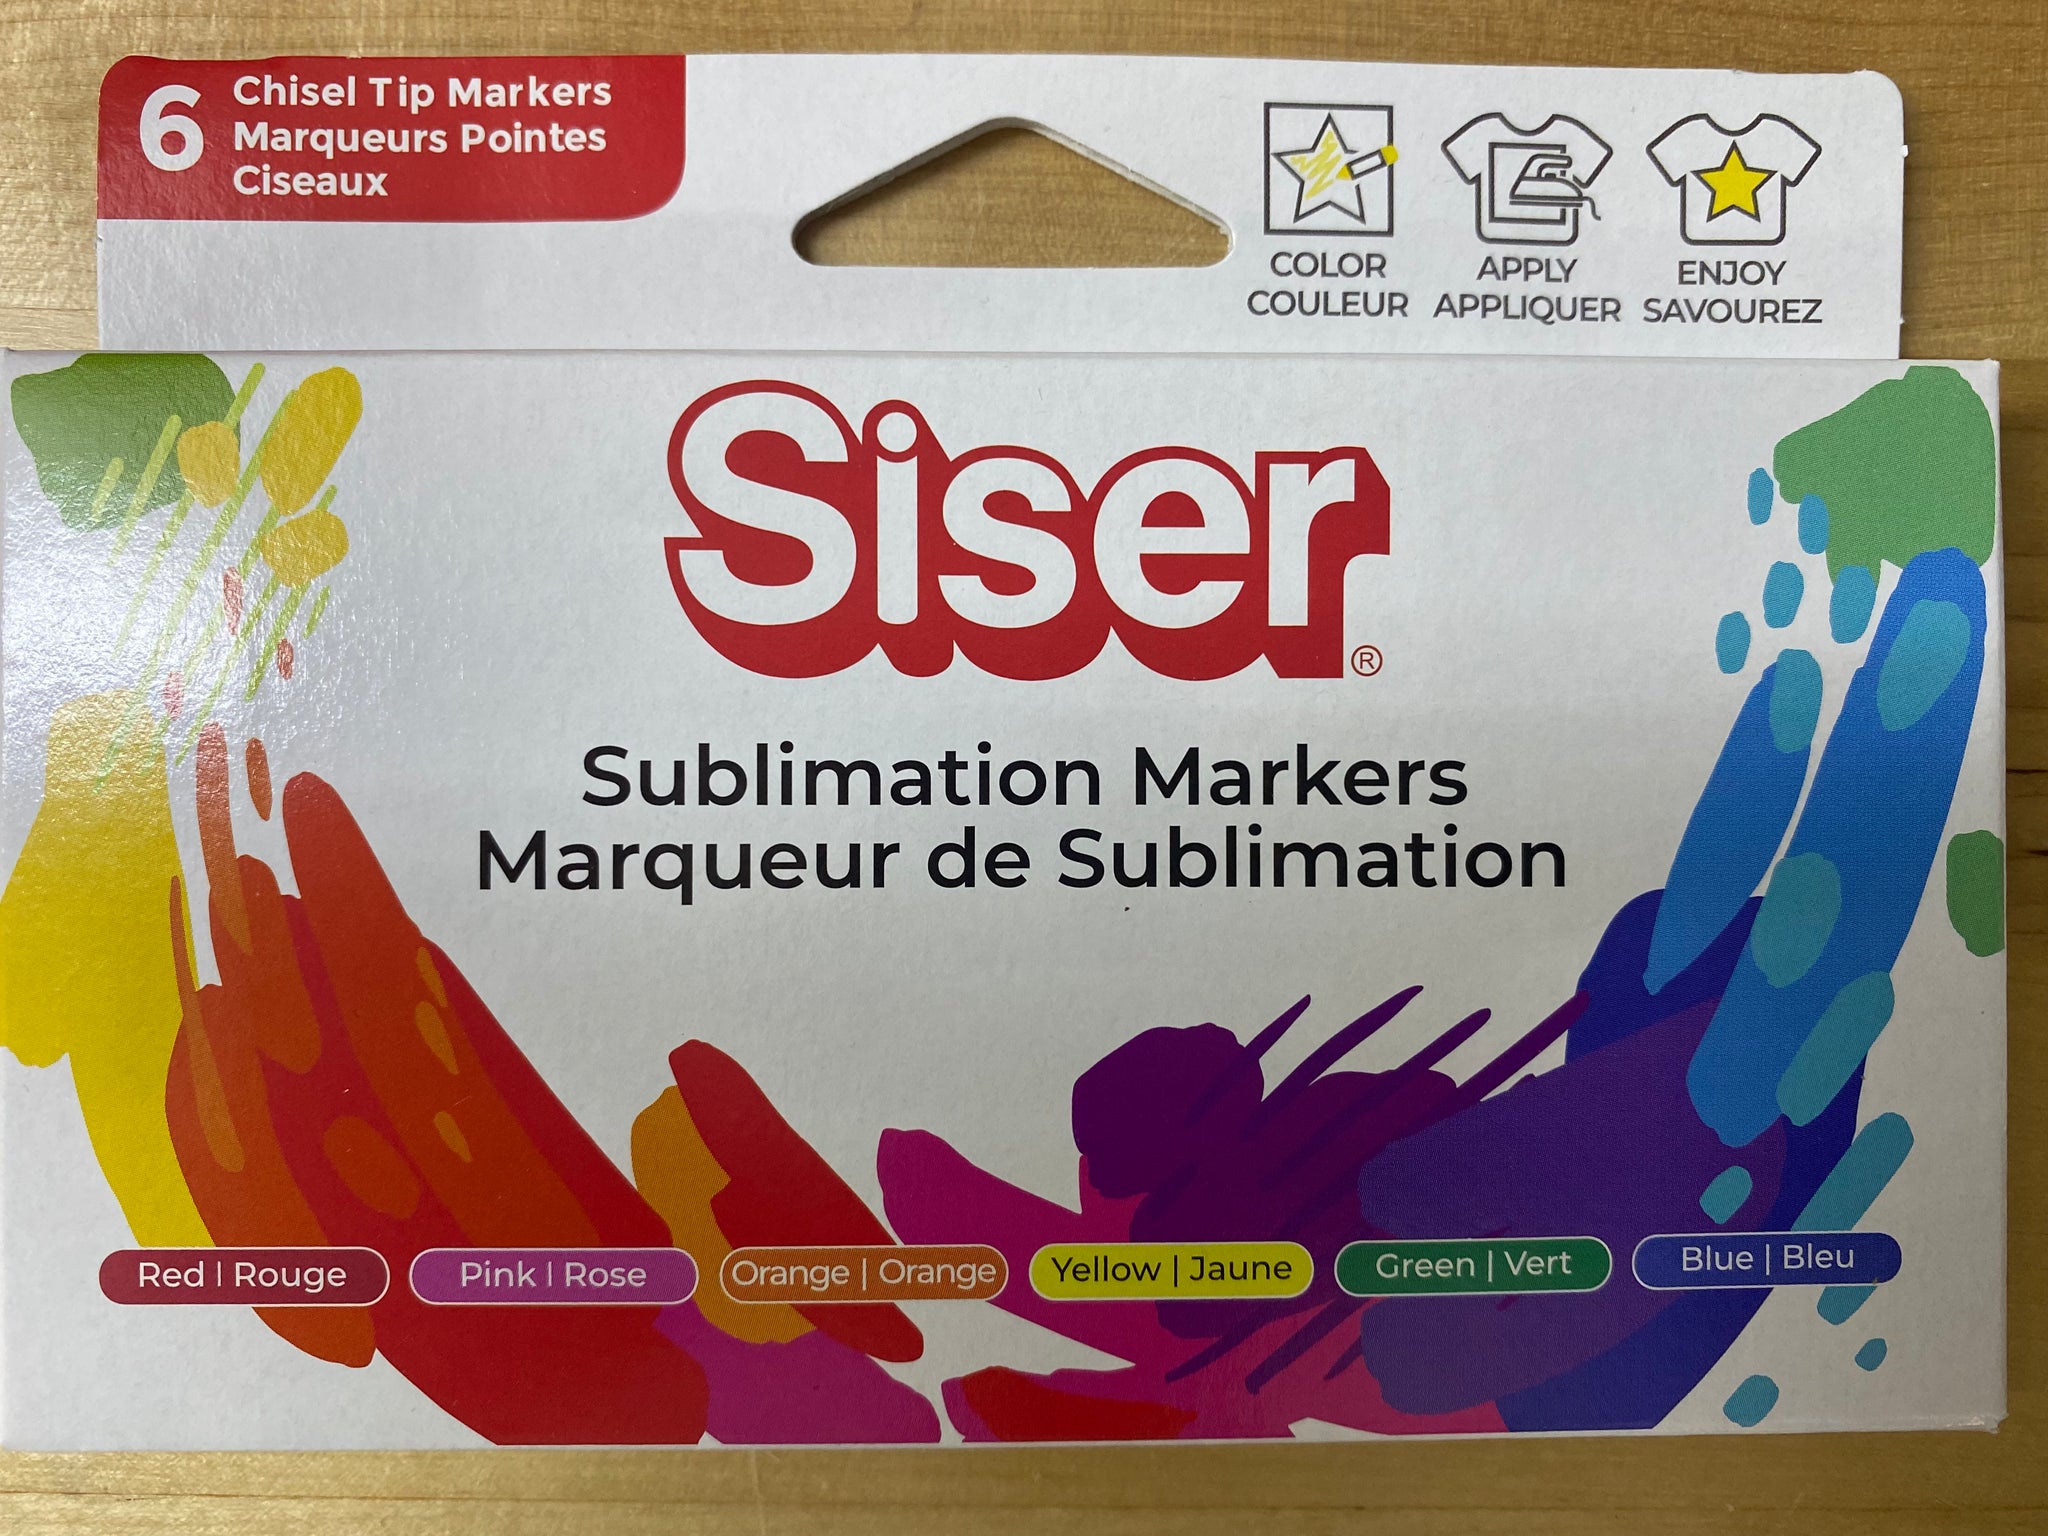 Siser Sublimation Marker Pen Pack in Black Ink Includes Fine, Round, and  Chisel Tips